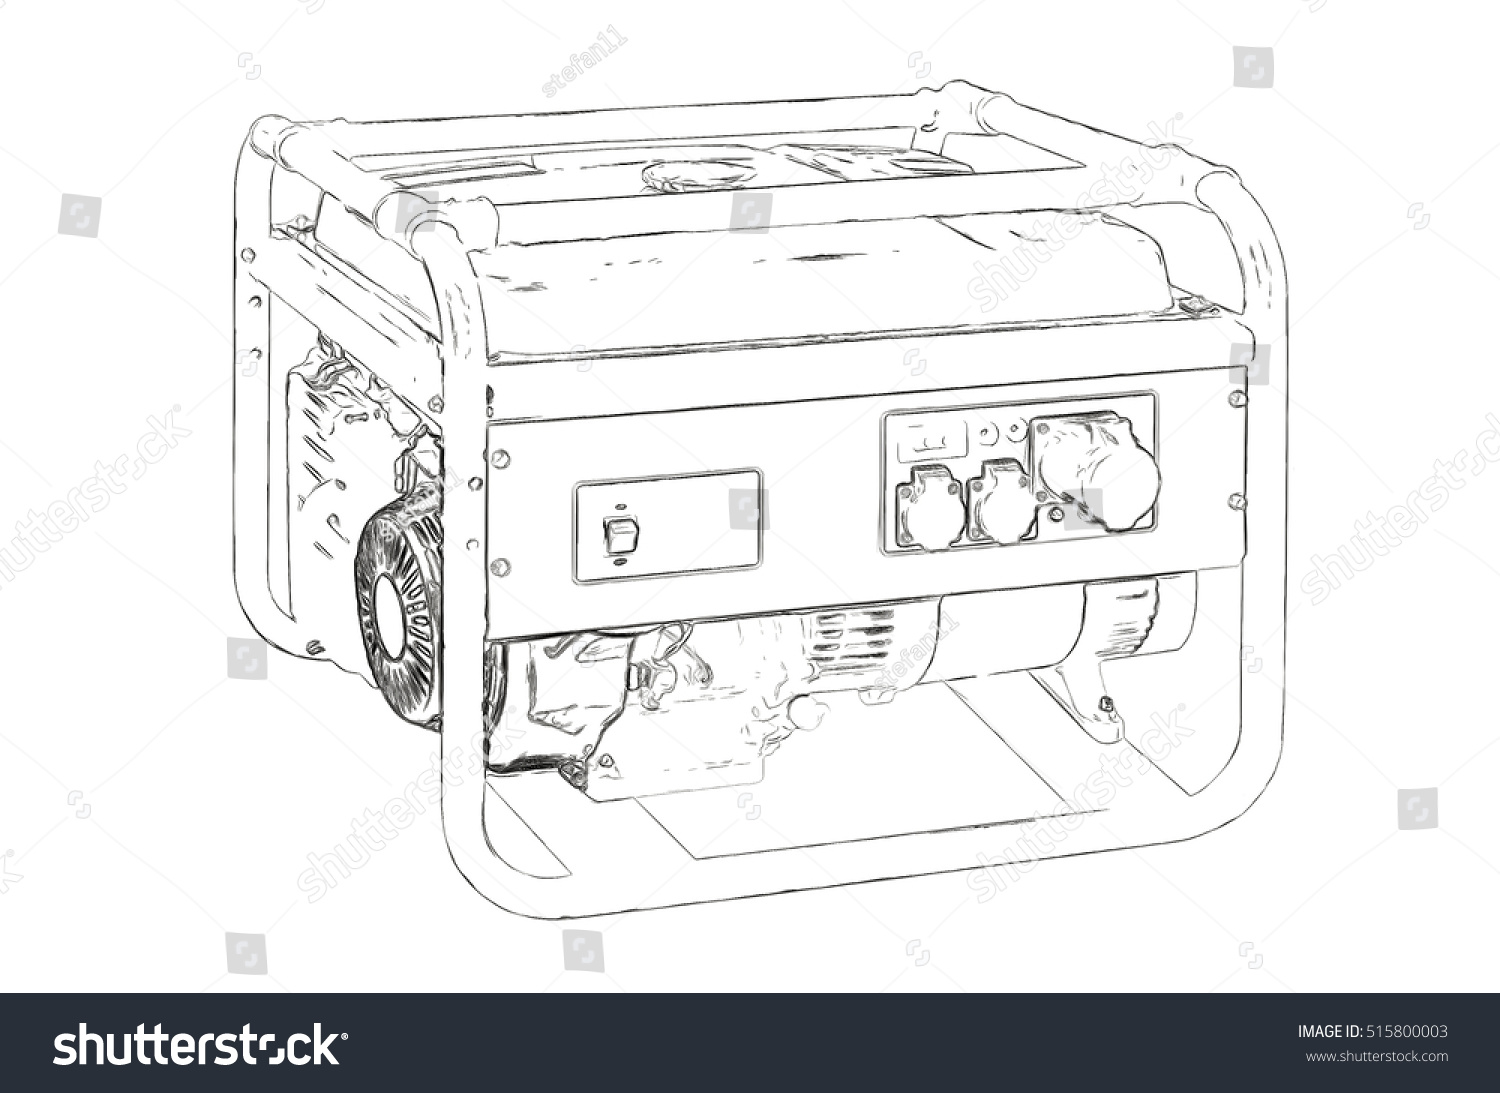 Outlines Of The Generator Stock Photo 515800003 : Shutterstock